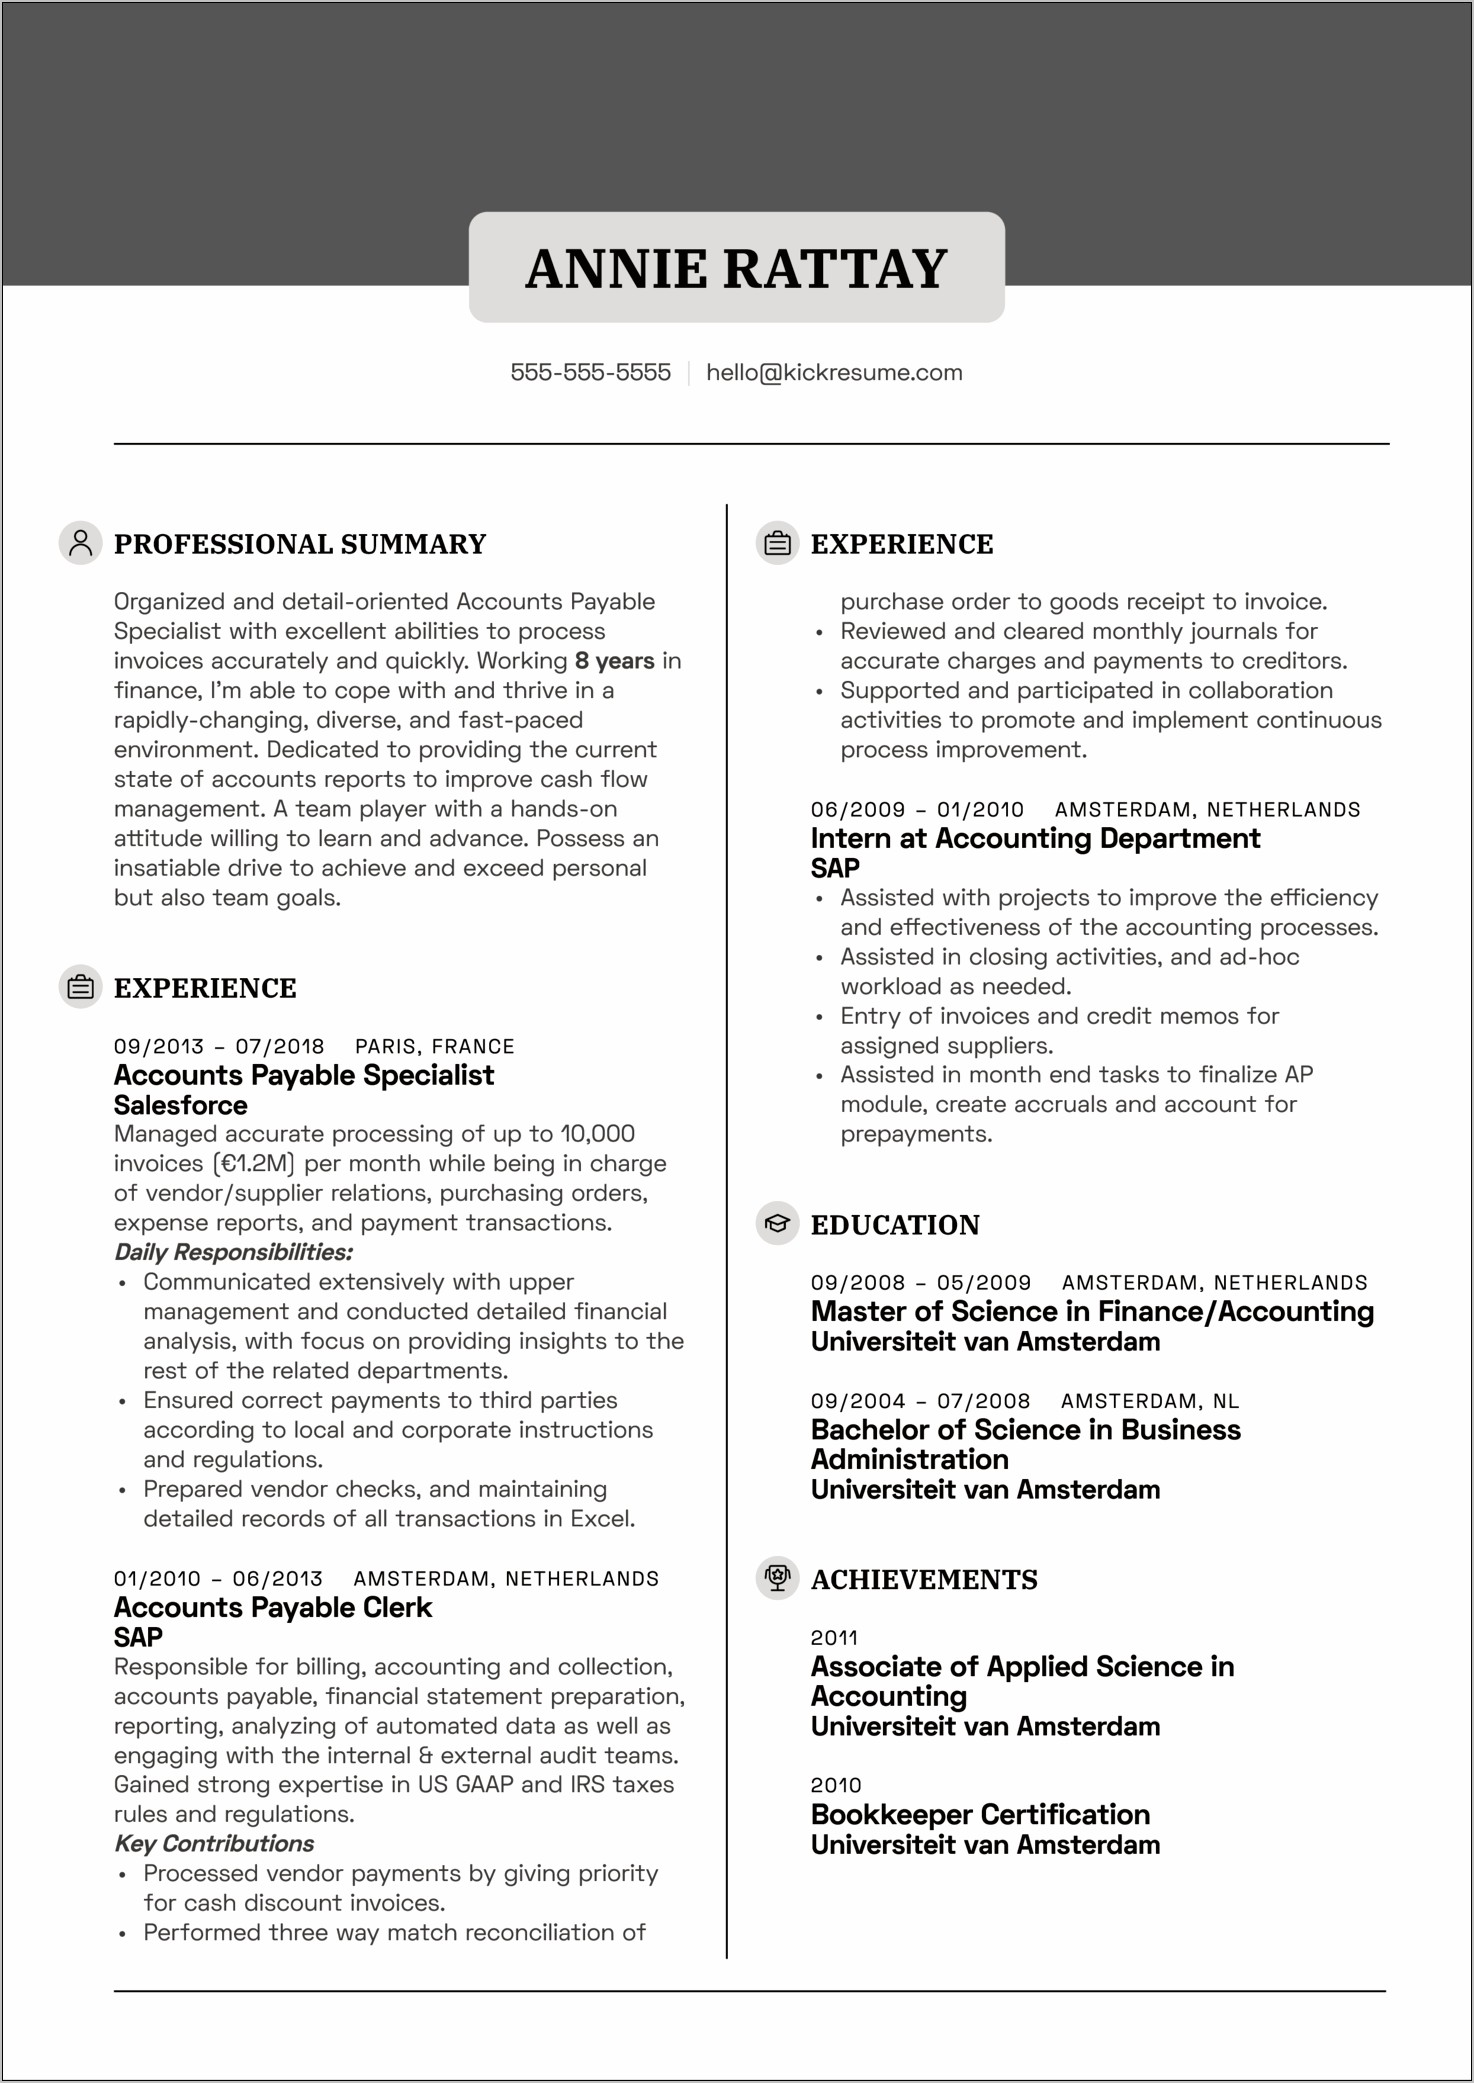 Example Of Resume Content For Accounts Payable Position